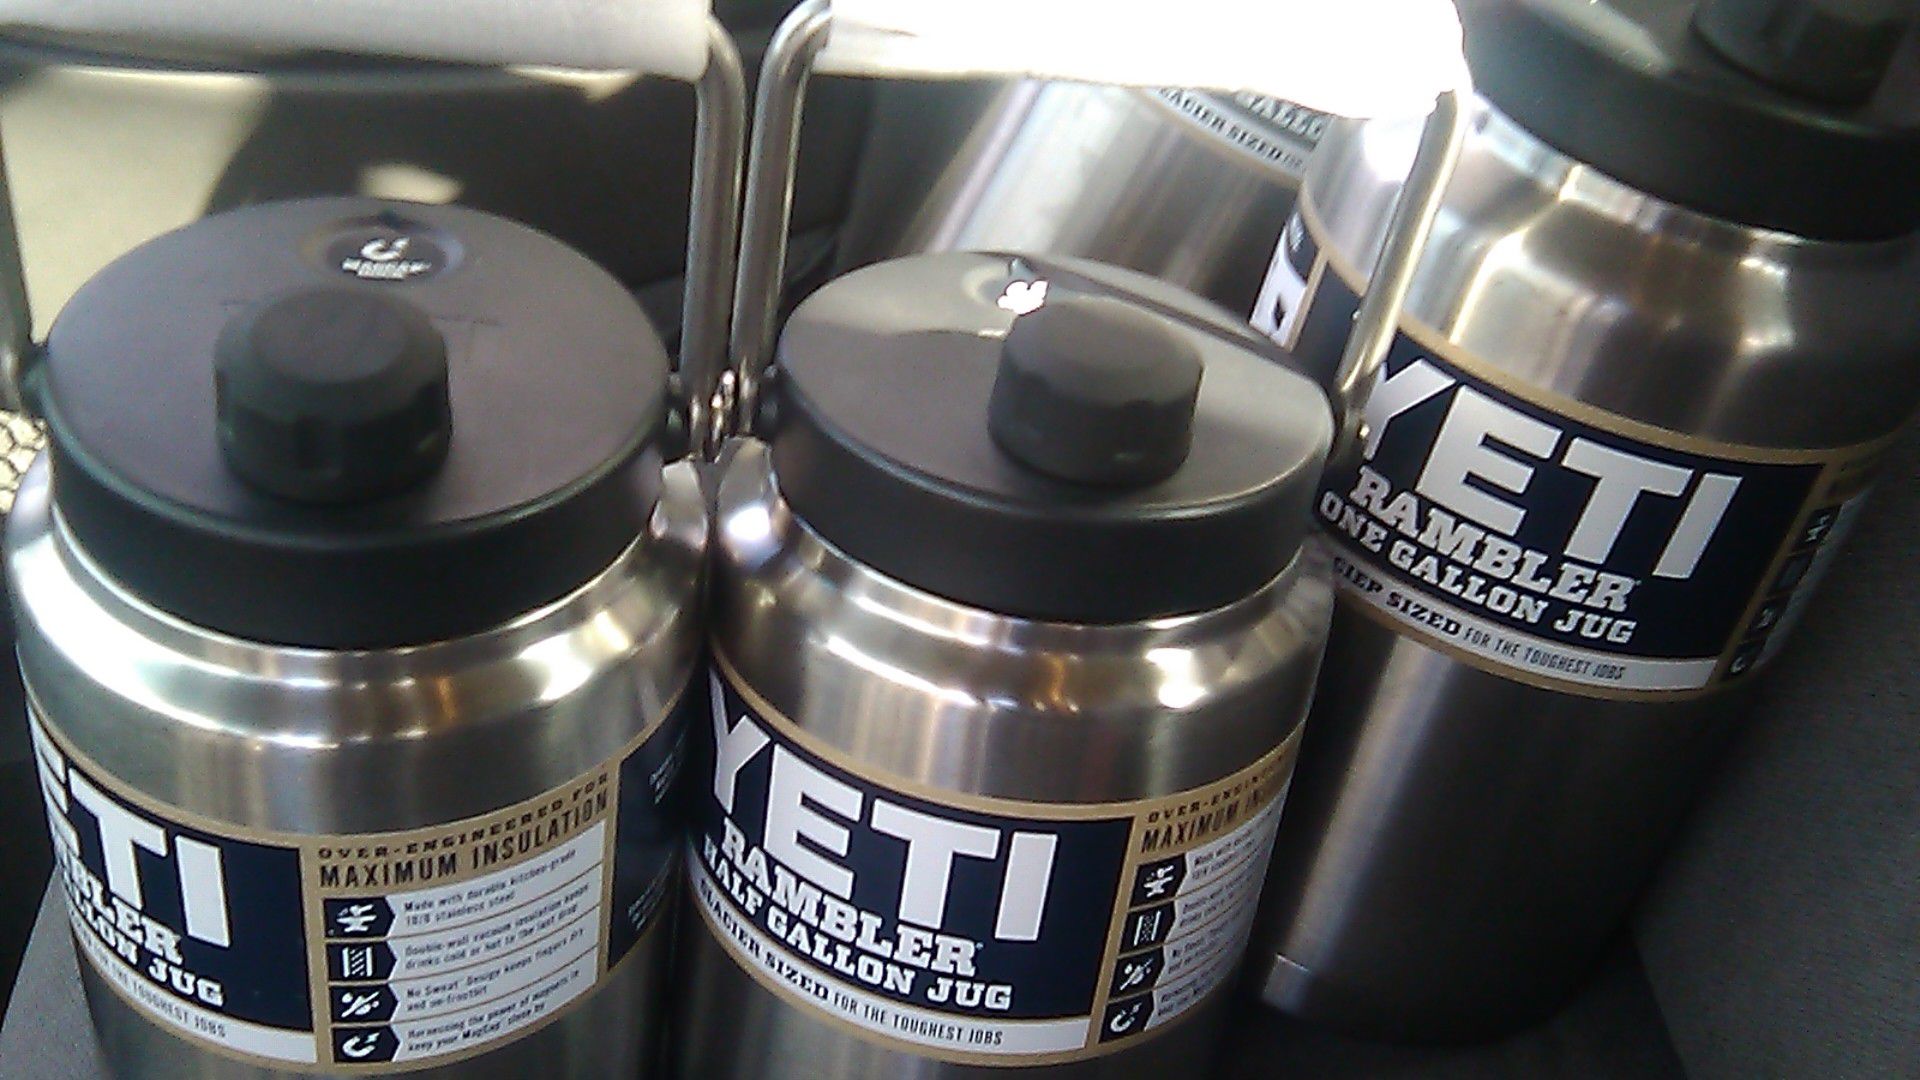 Yeti one gallon jugs two of them and one half gallon jugs the one gallon jugs worth 129.99$ the half gallon jugs 99.00$